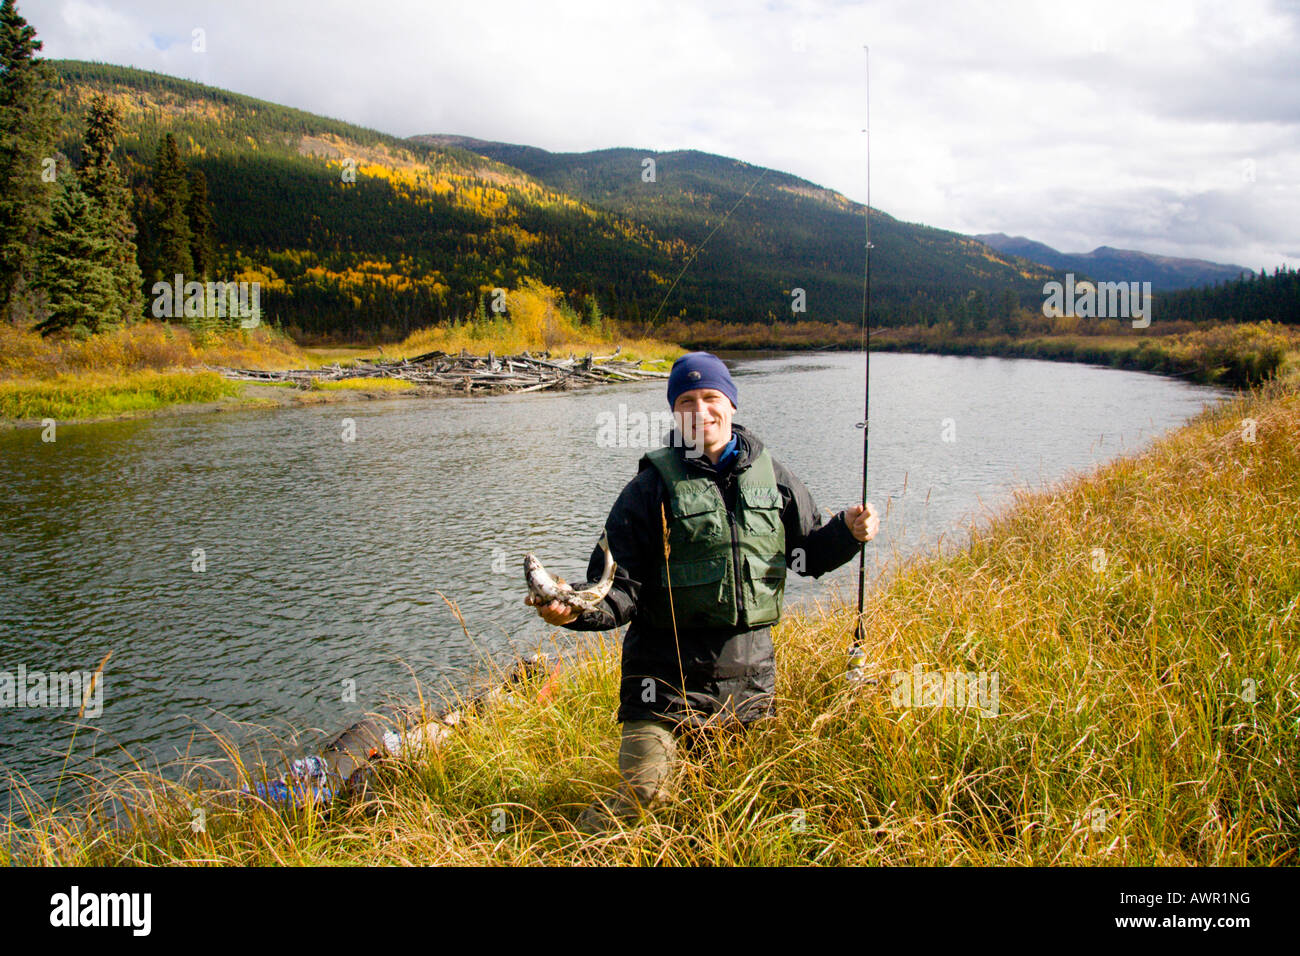 Fisherman and his catch standing on the bank of Big Salmon River, Yukon Territory, Canada Stock Photo